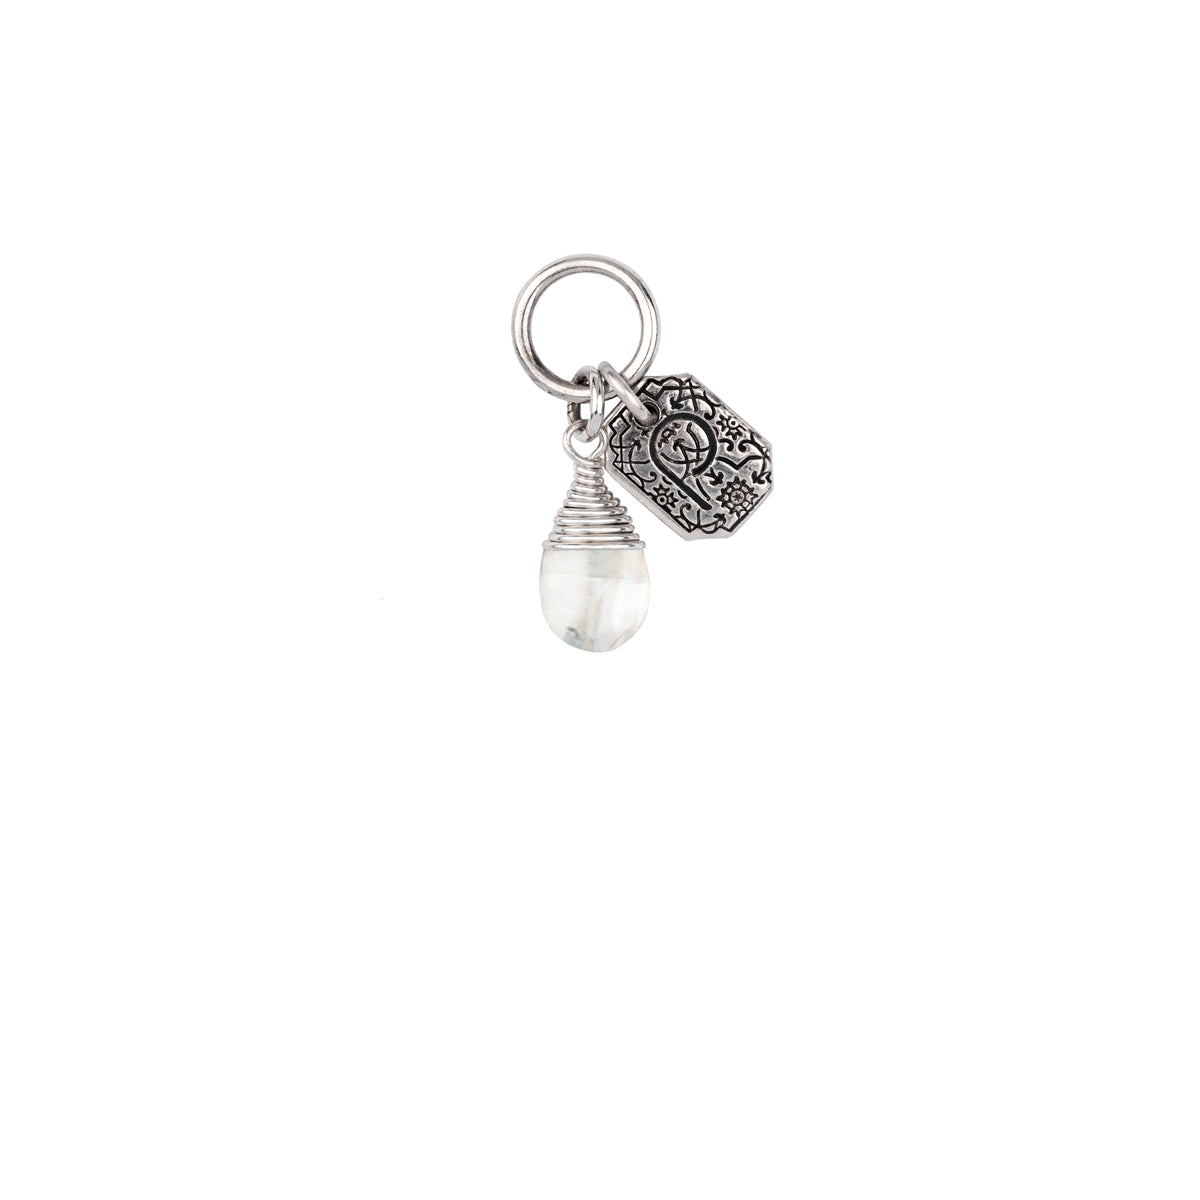 A sterling silver signature attraction charm capped with a white moonstone that represents improvement.